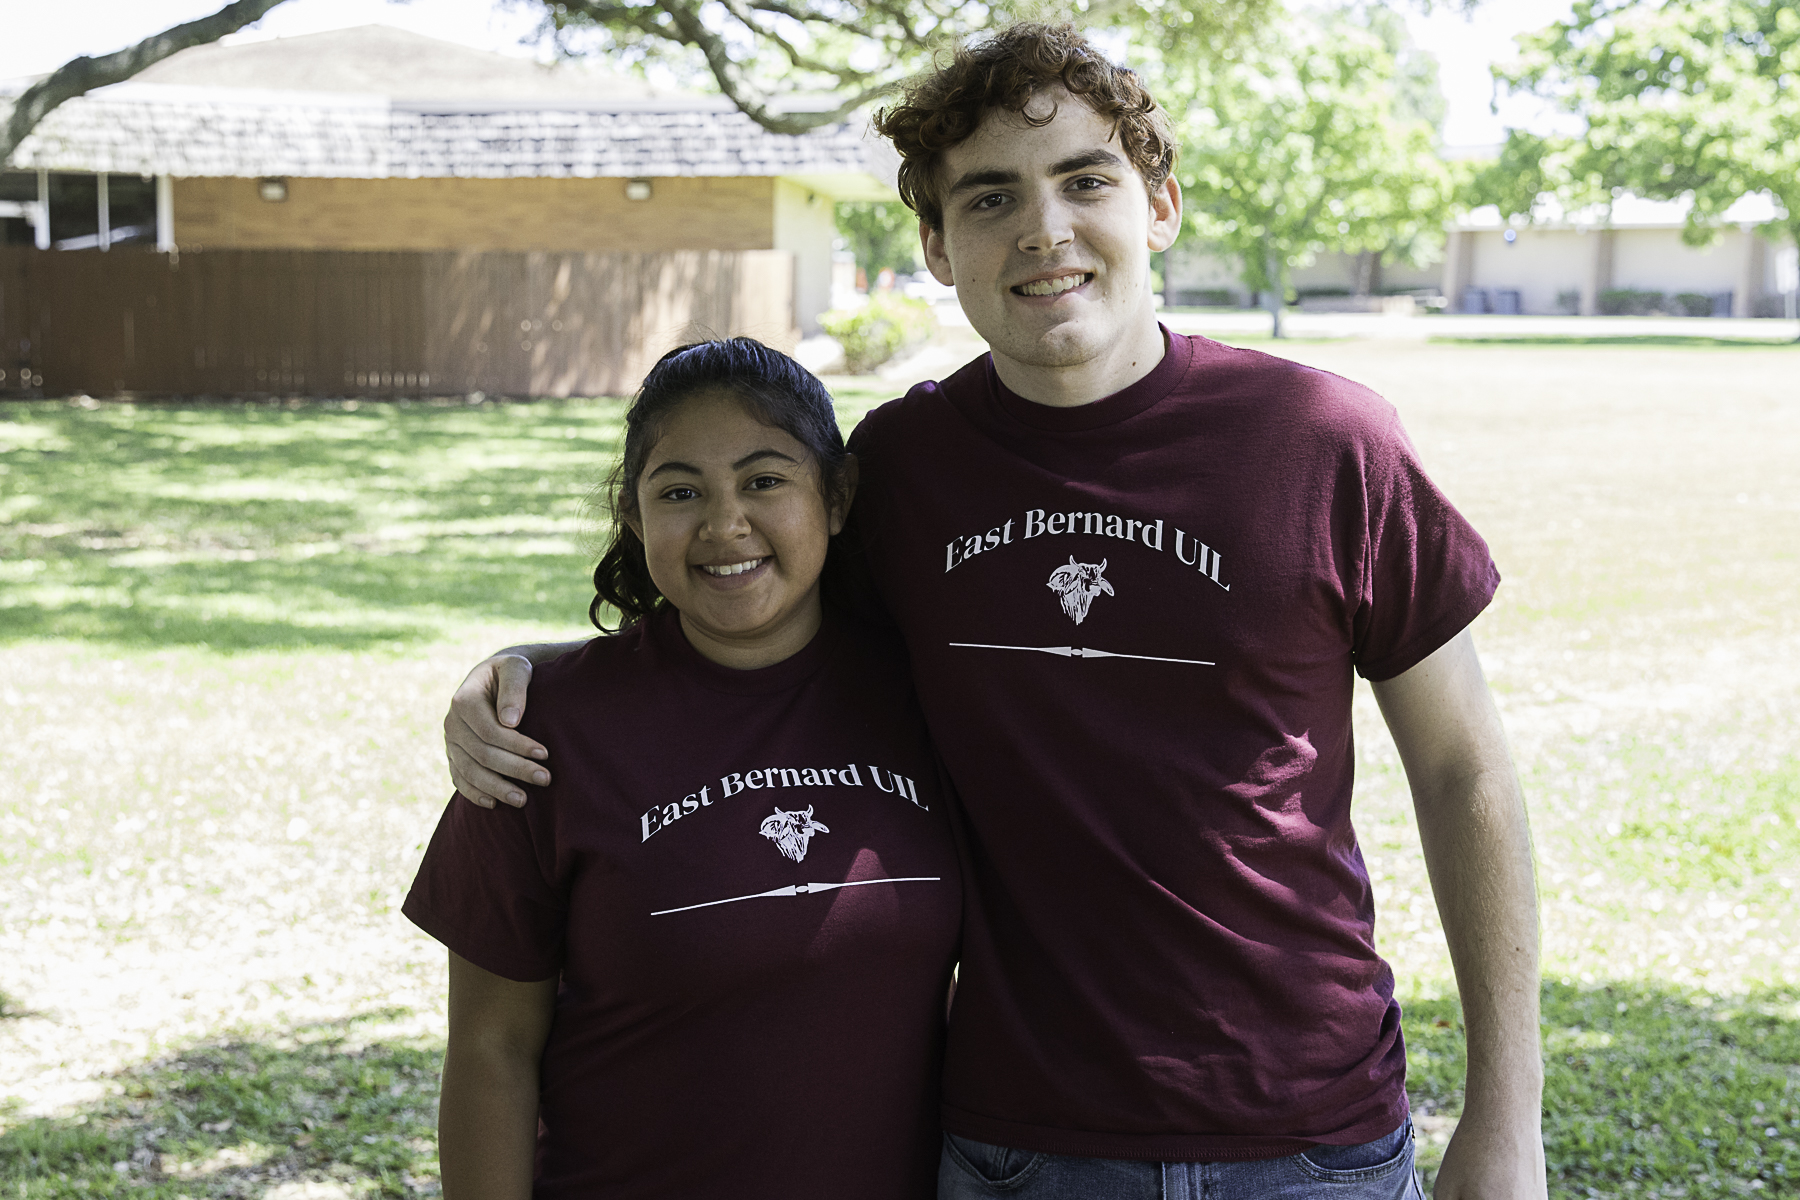 Wharton County Junior College recently hosted a University Interscholastic League event at the Wharton campus.